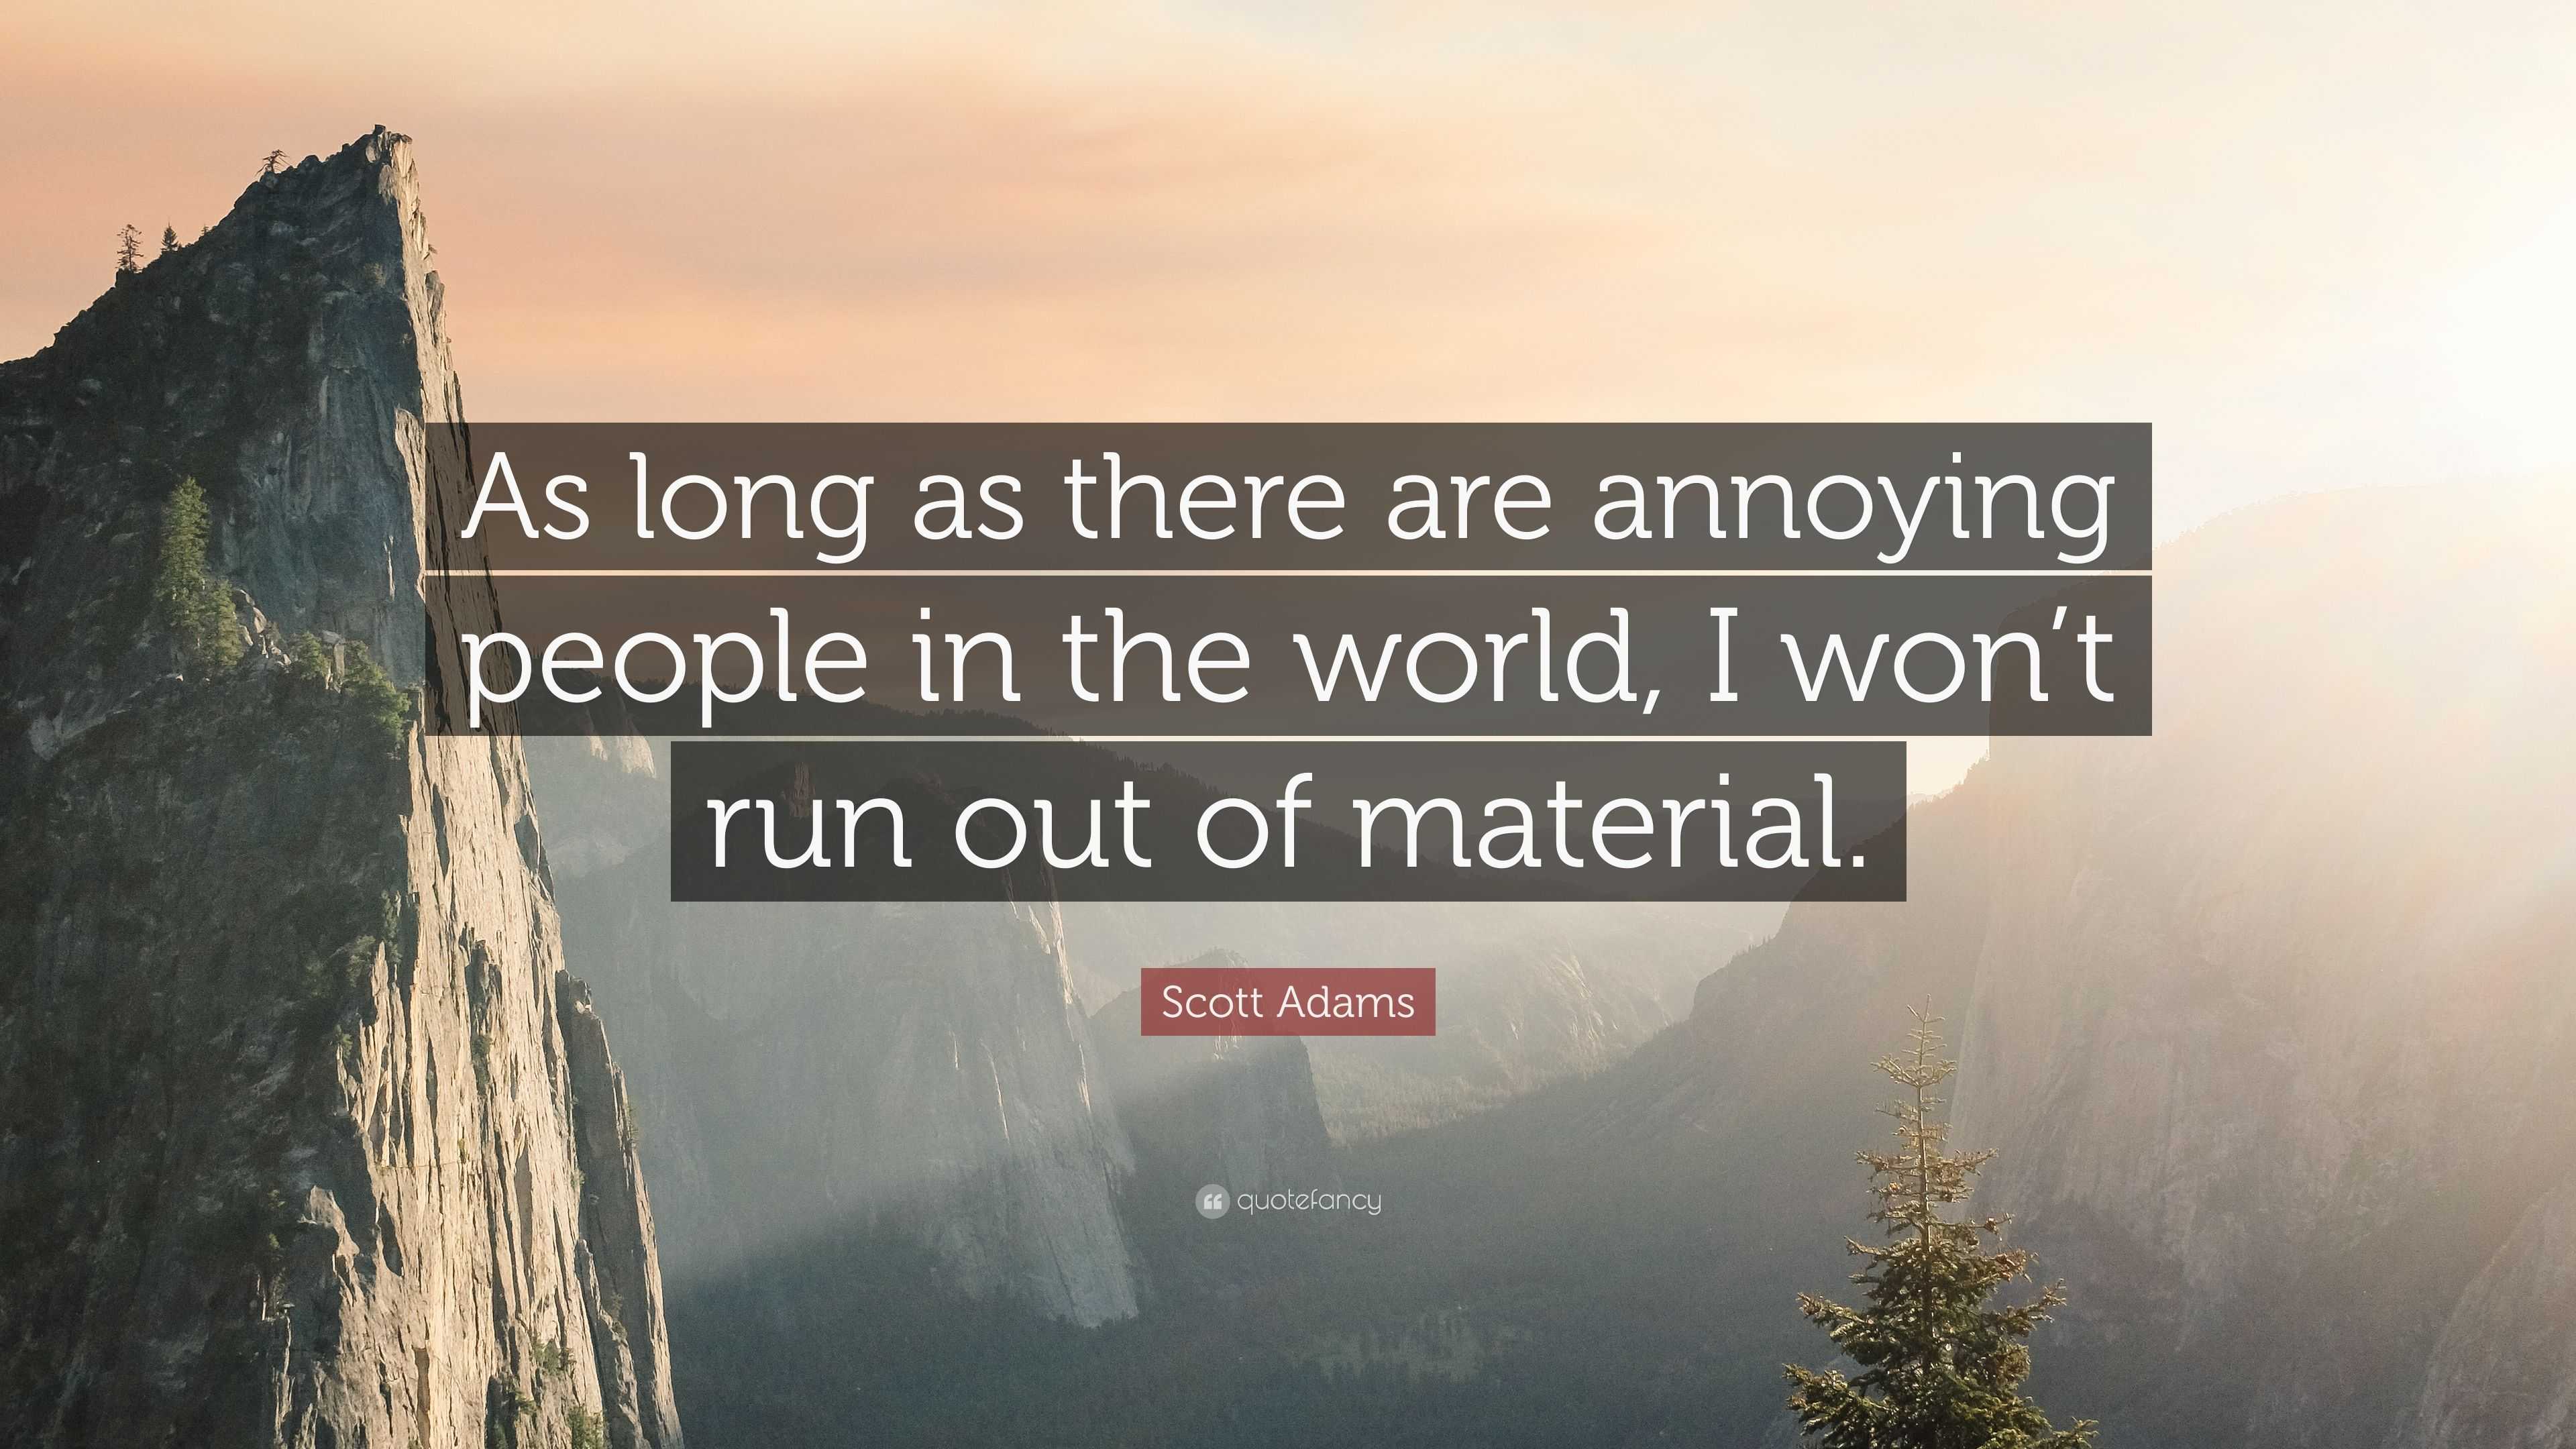 Scott Adams Quote “As long as there are annoying people in the world